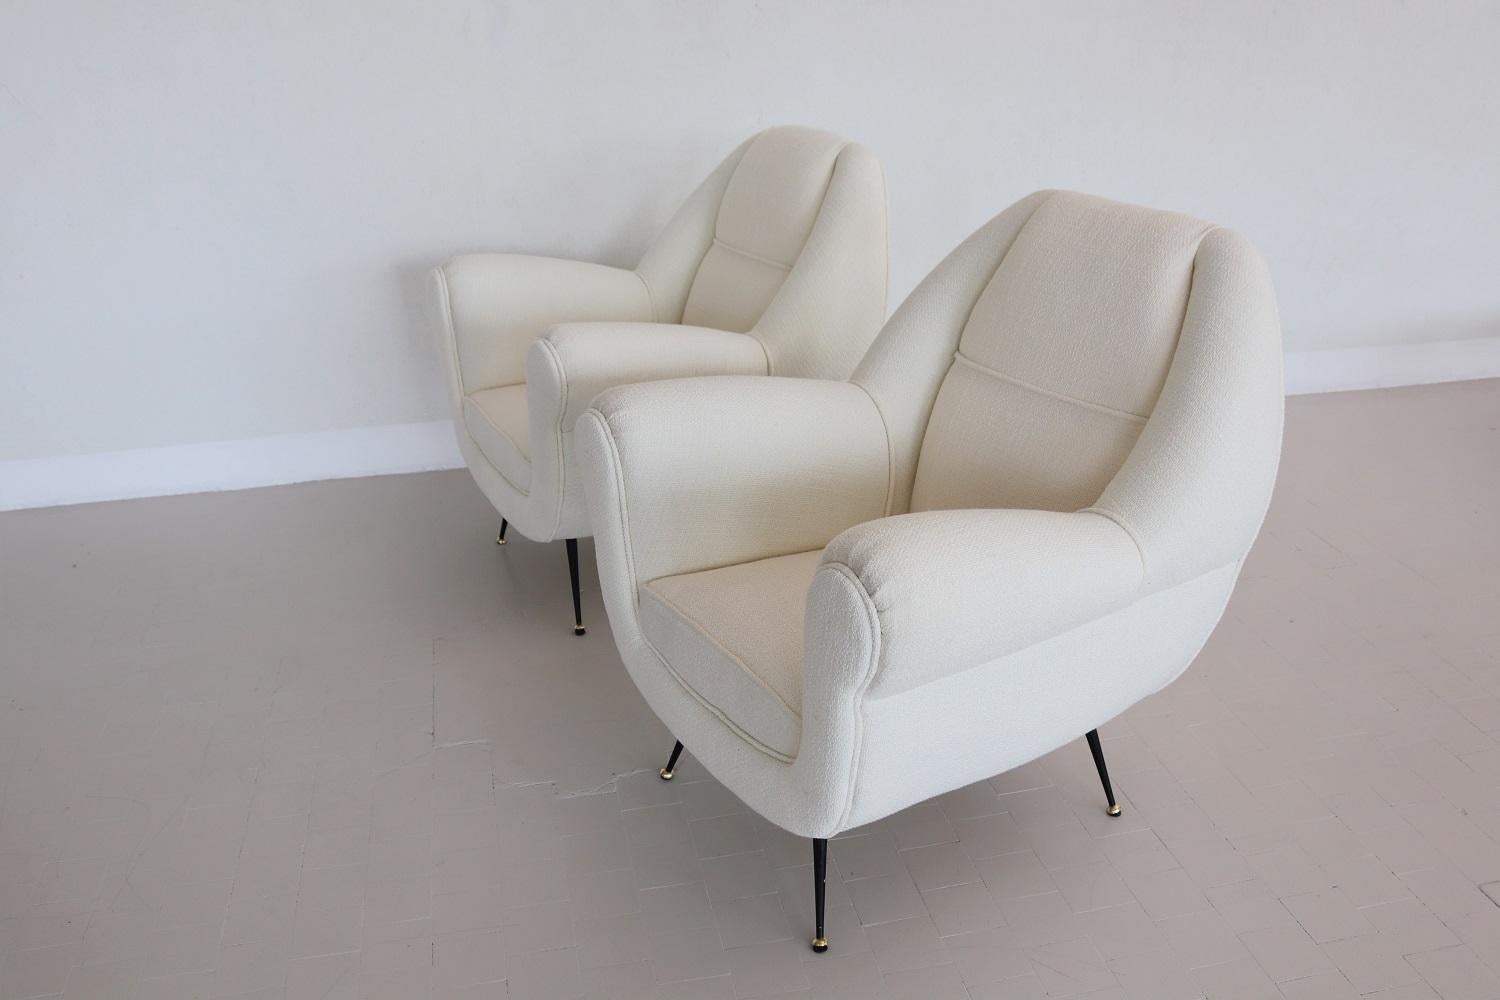 Italian Midcentury Armchairs in White Upholstery and Brass Stiletto Feet, 1960s For Sale 8